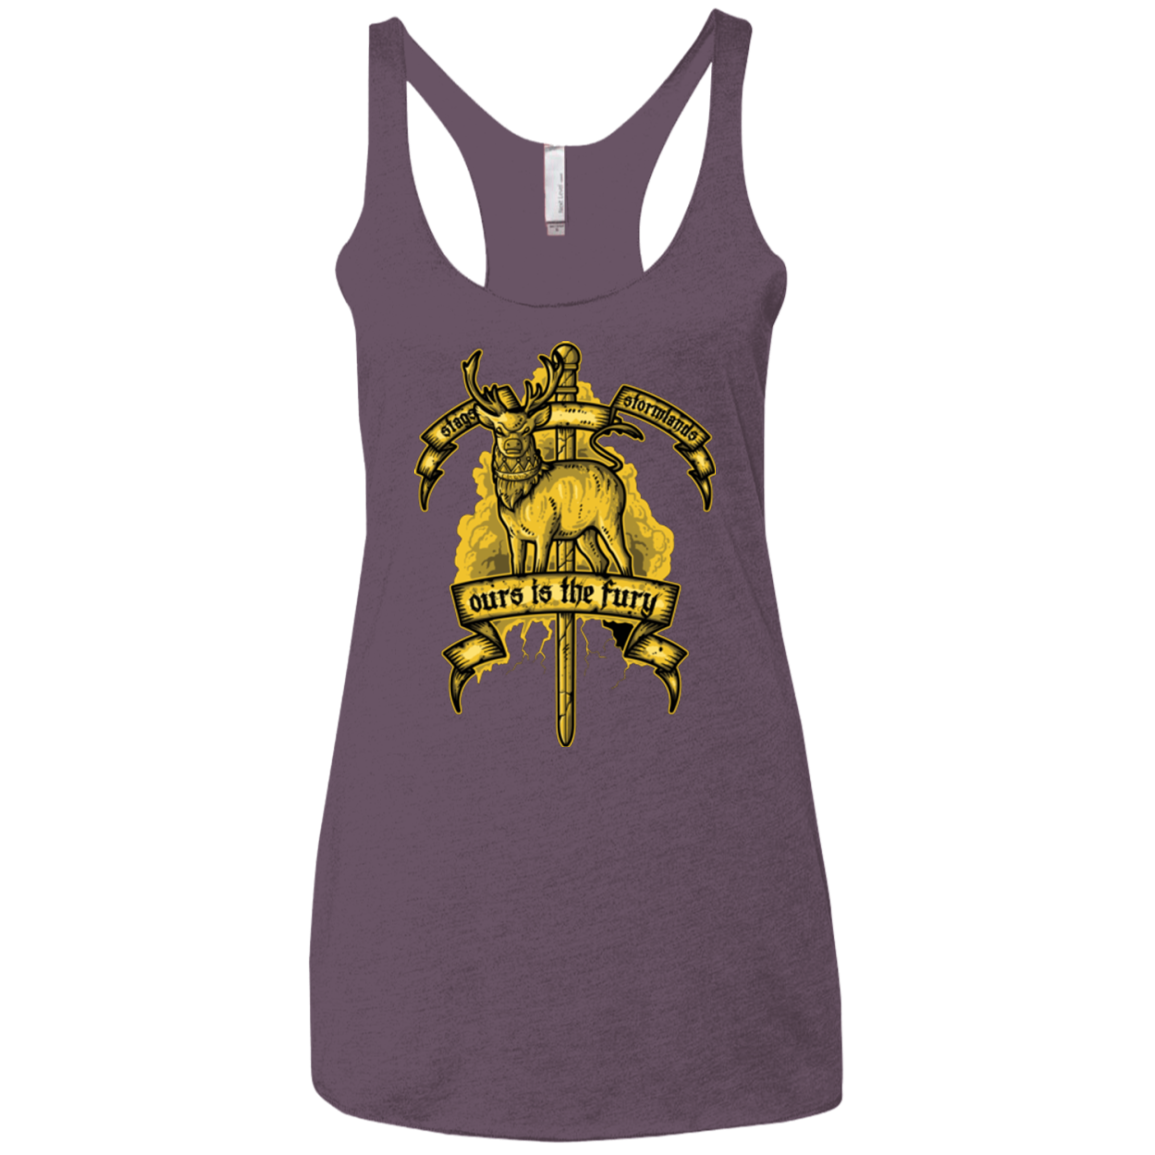 OURS IS THE FURY Women's Triblend Racerback Tank